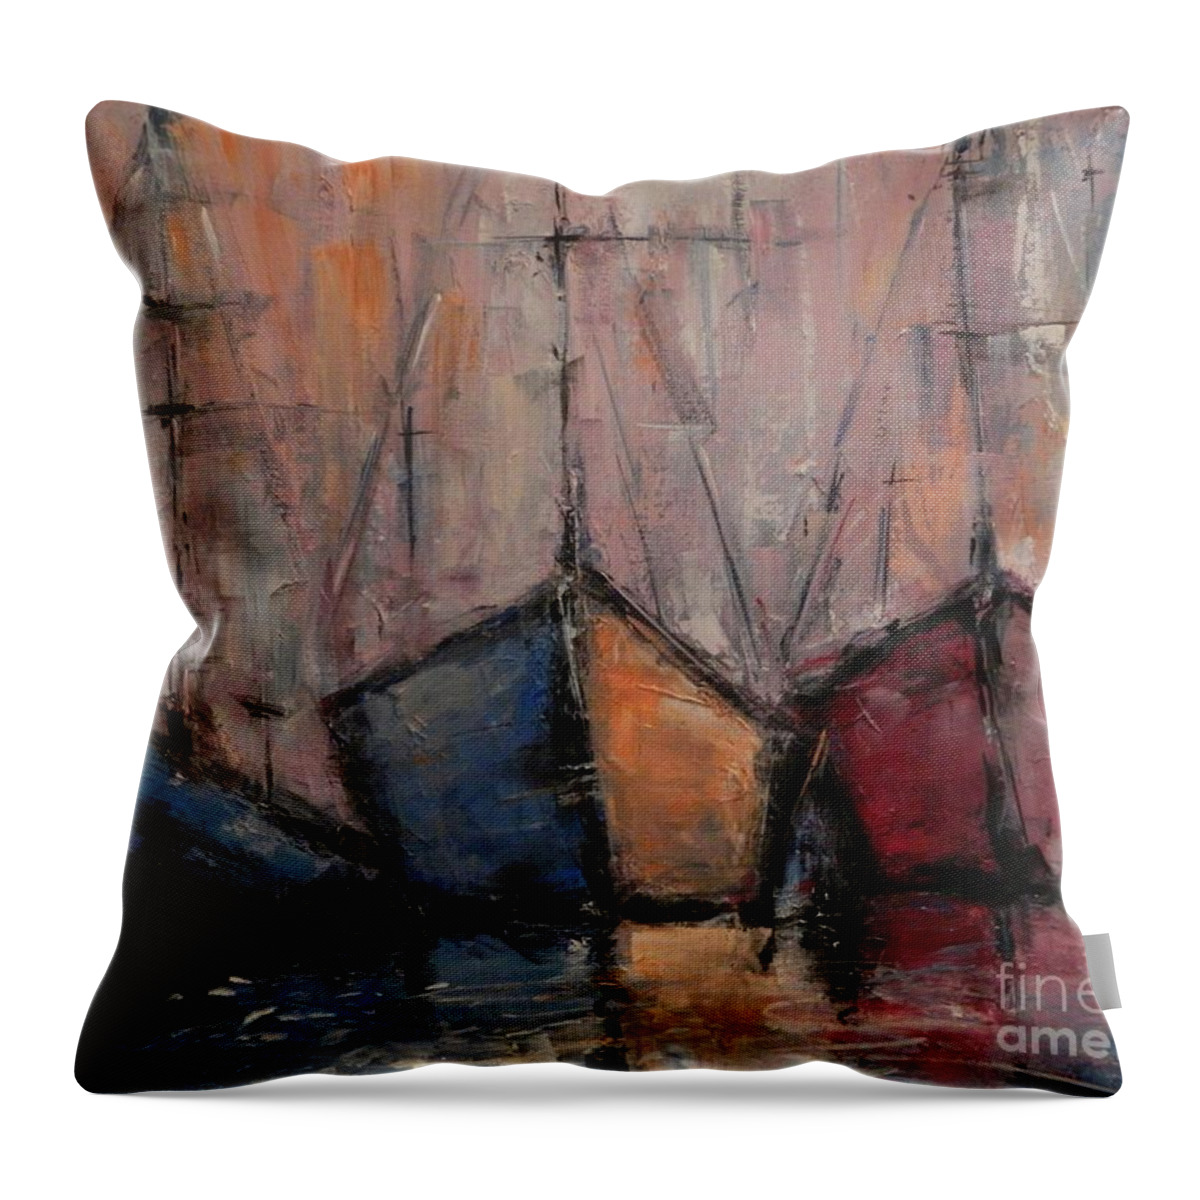 Boats Throw Pillow featuring the painting Old Baldy Boats by Dan Campbell